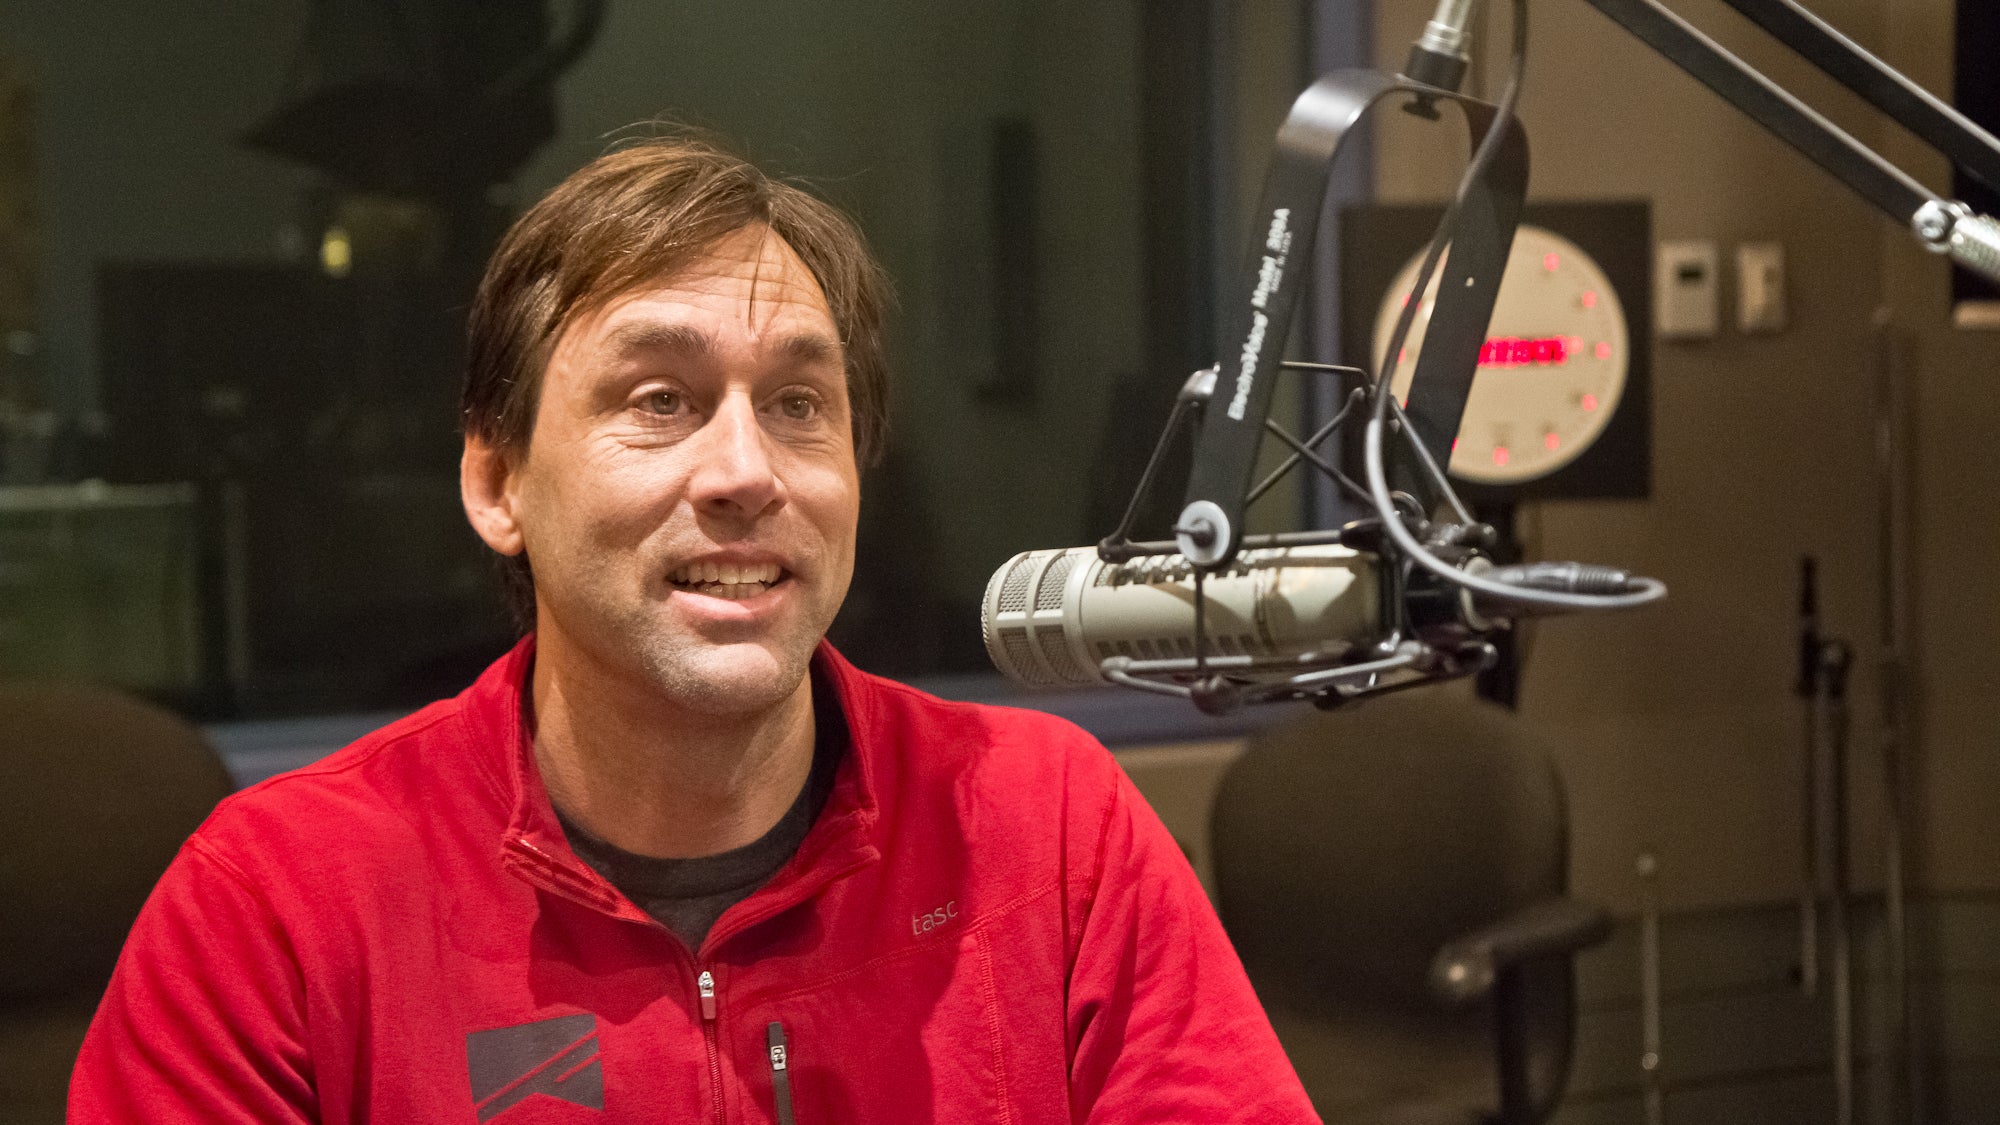  Erik Weihenmayer, author of 'No Barriers: A Blind Man’s Journey to Kayak the Grand Canyon,' visits WHYY studios Tuesday. (Kimberly Paynter/WHYY) 